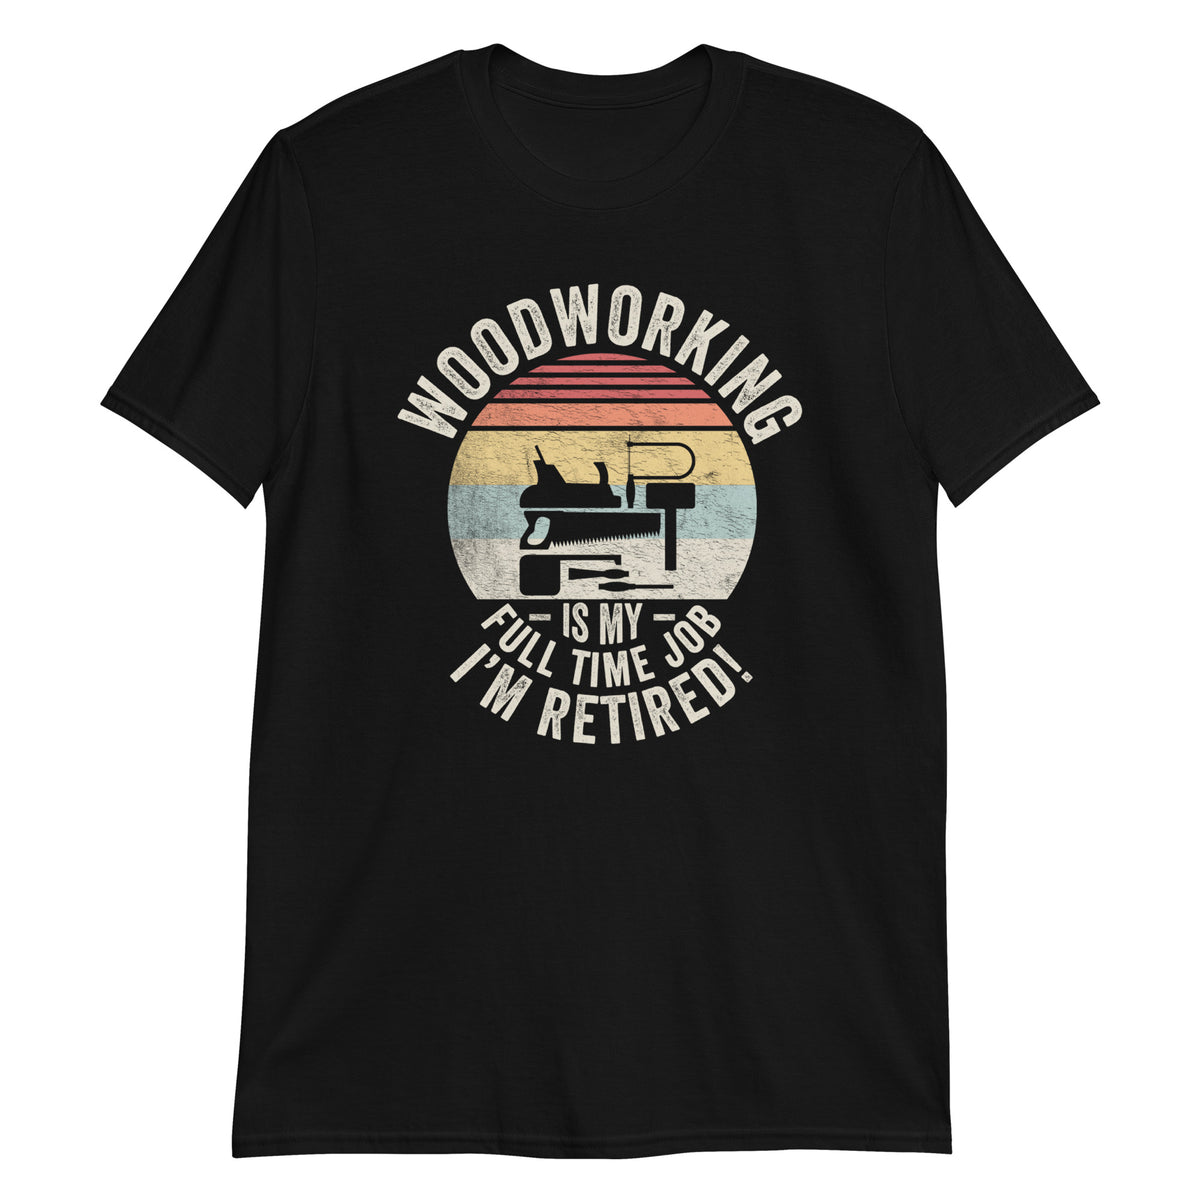 Woodworking Is My Full Time Job I'm Retired Funny Carpenter & Woodworking T-Shirt